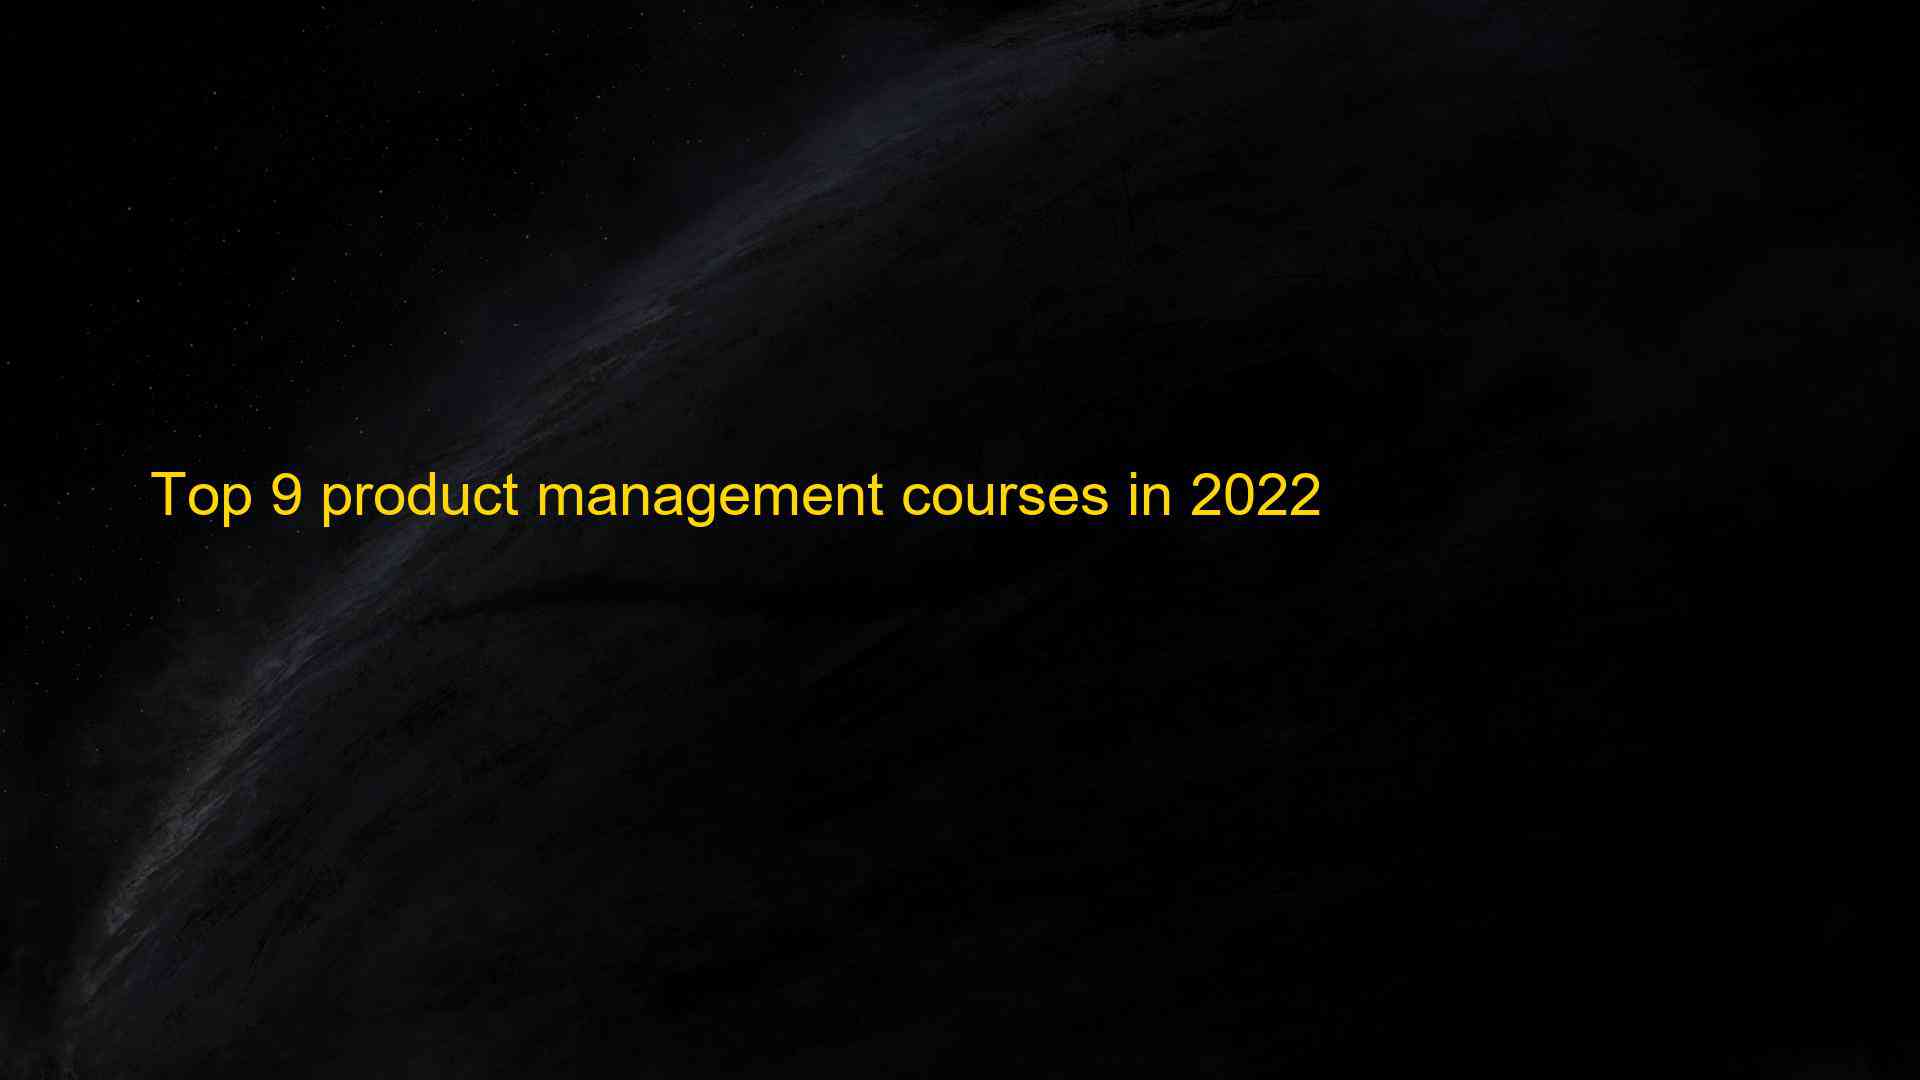 Top 9 product management courses in 2022 1660793925